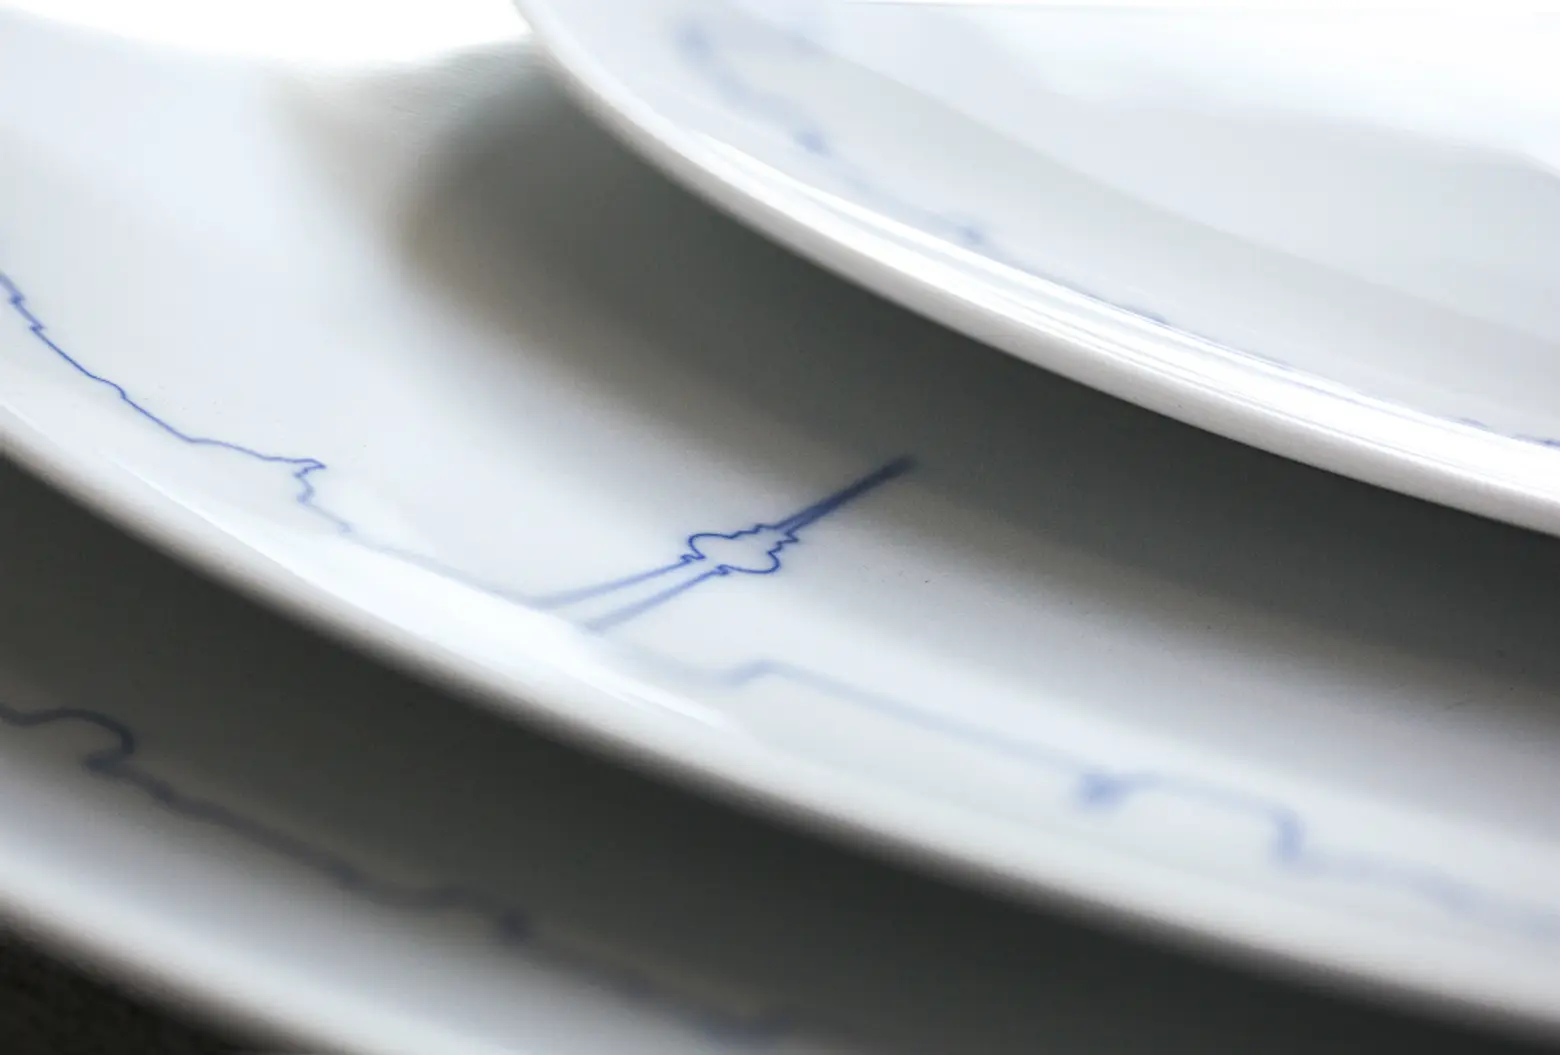 TAC - Big Cities tableware designed by BIG and KILO